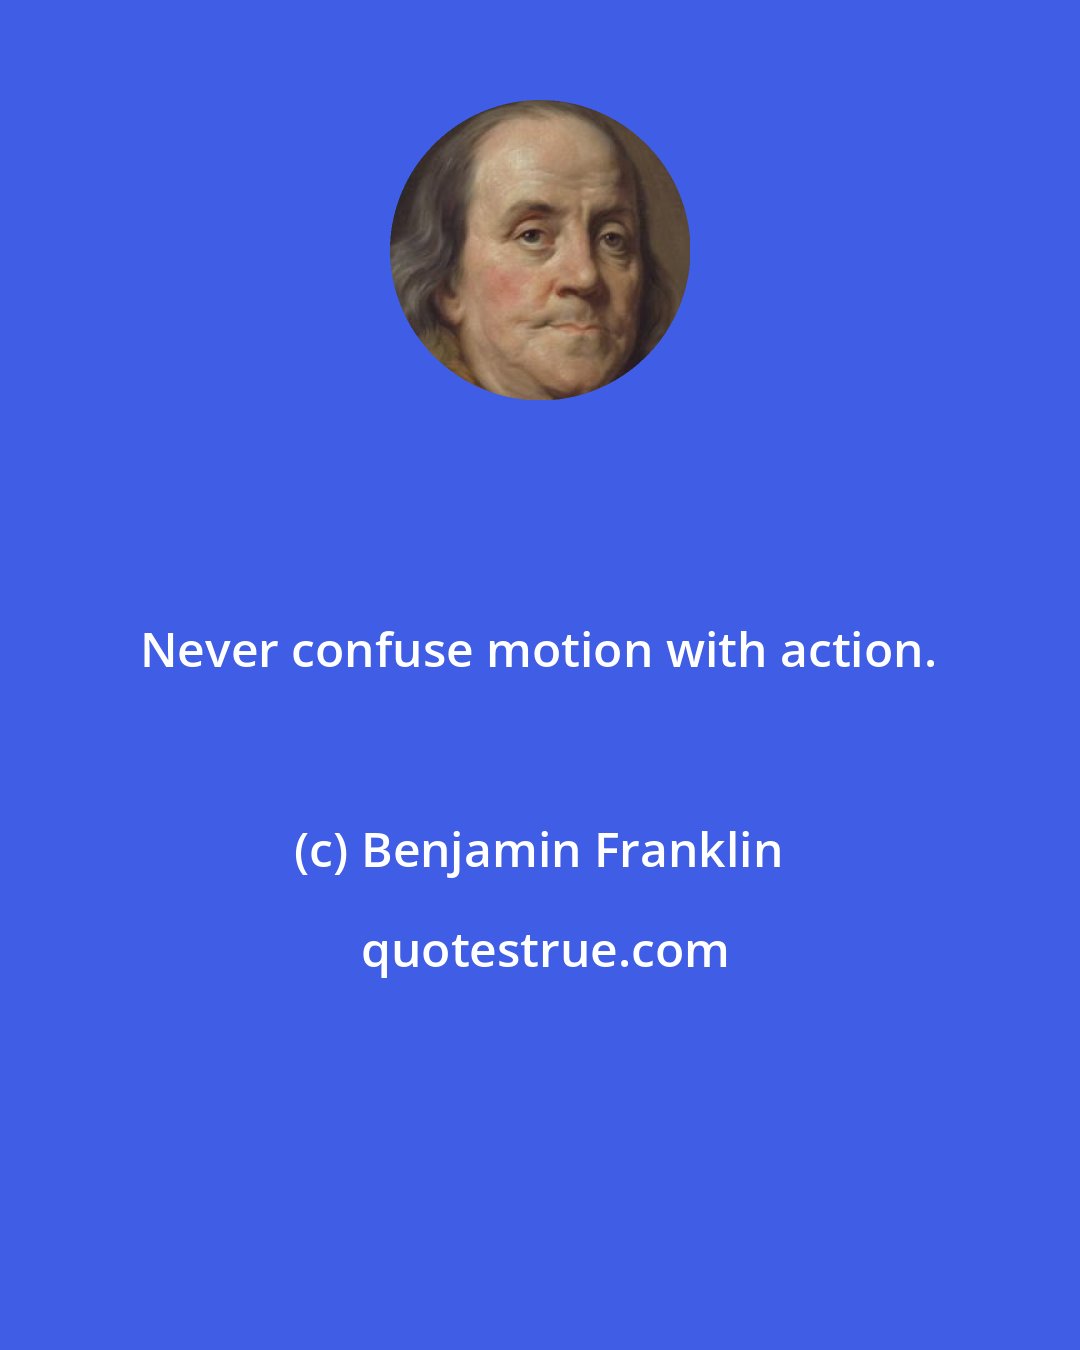 Benjamin Franklin: Never confuse motion with action.